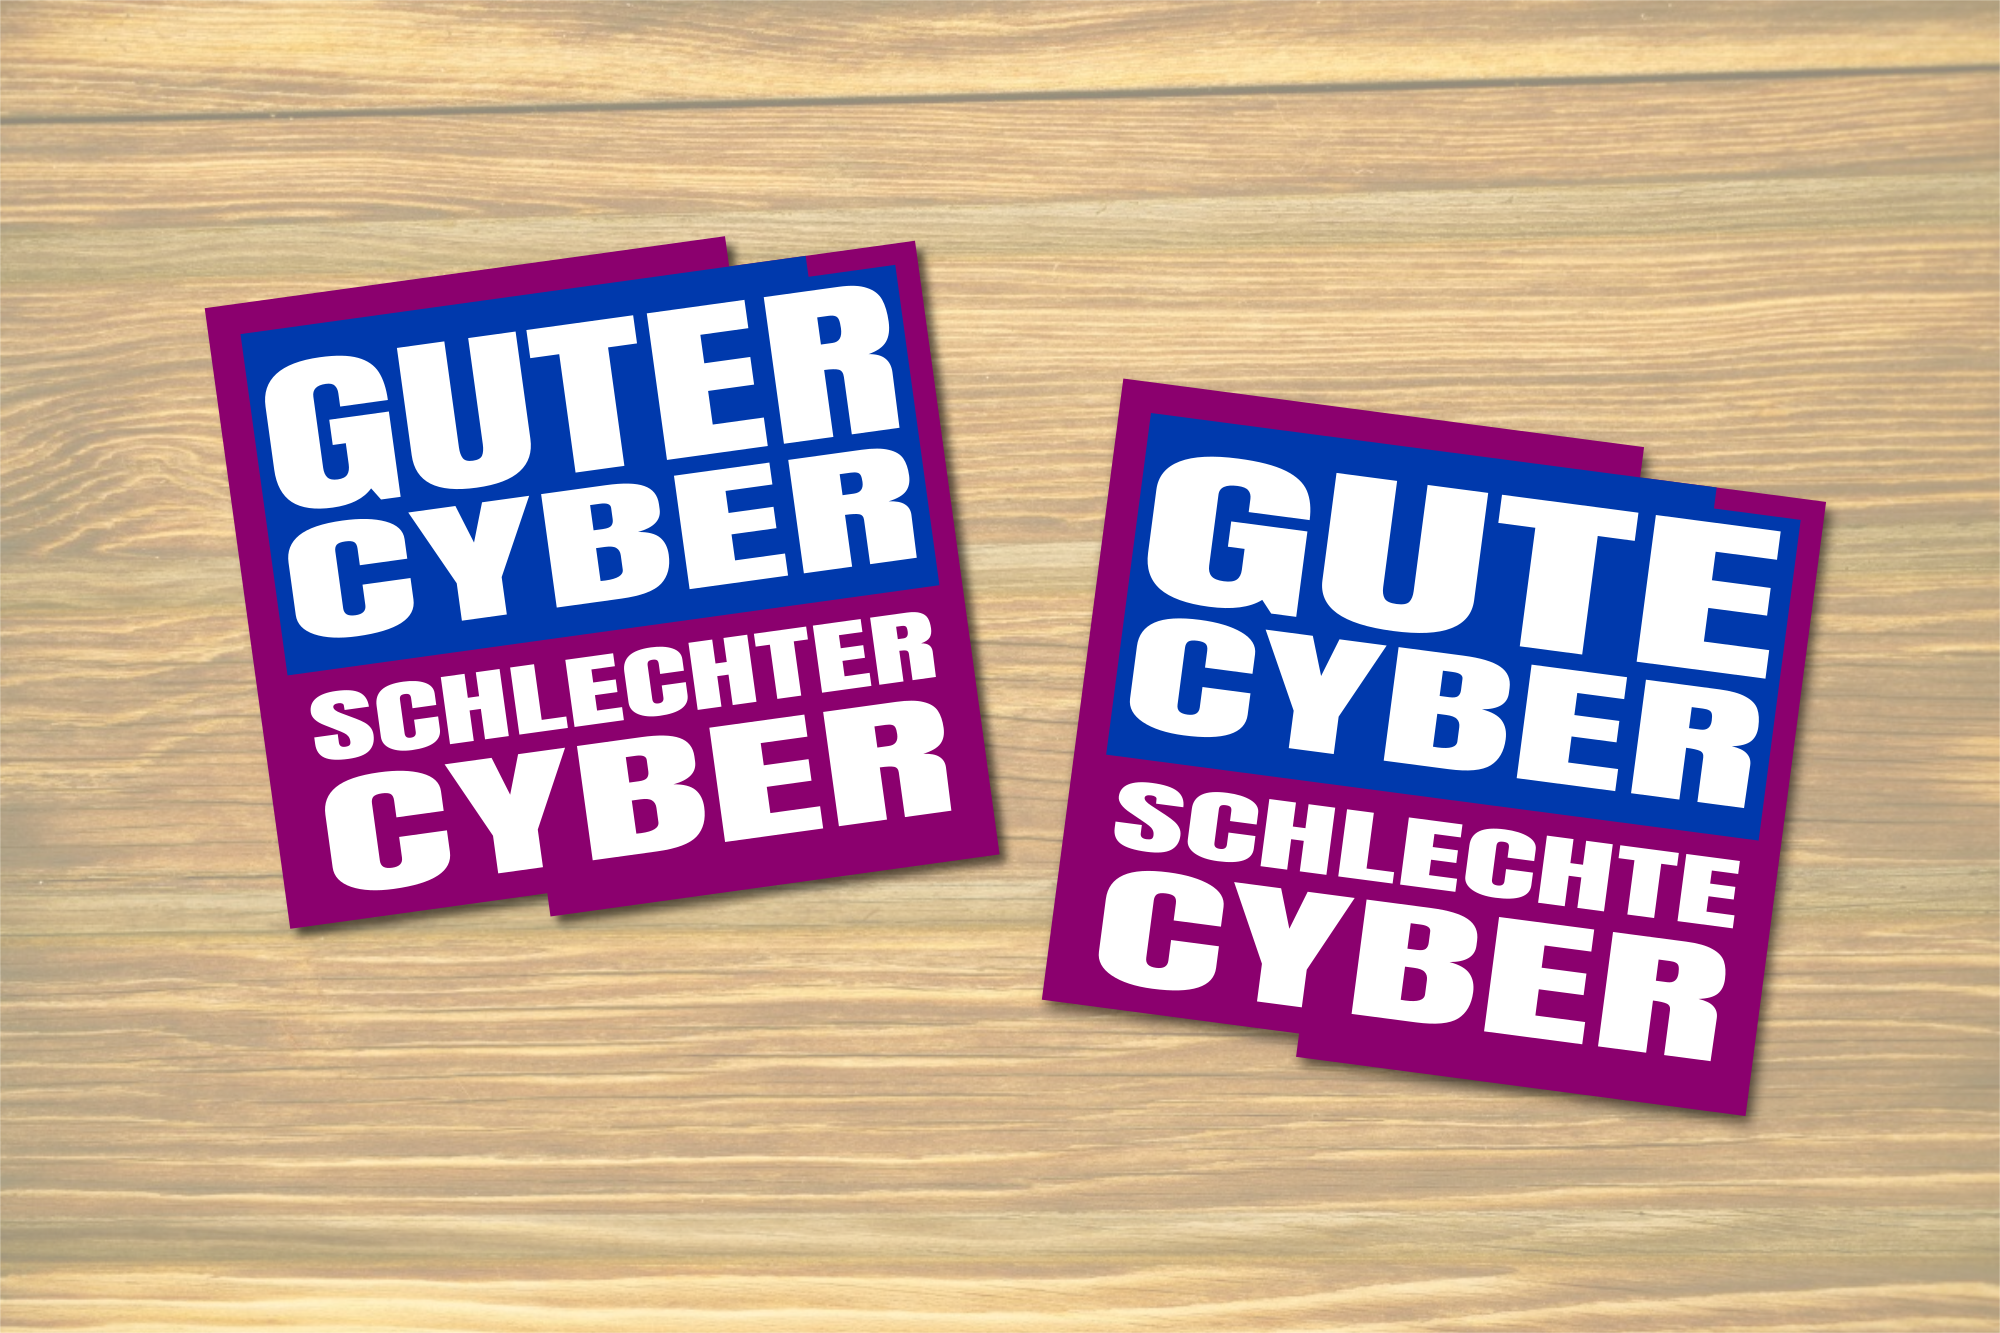 Stickers that say "Gutes Cyber, schlechtes Cyber"